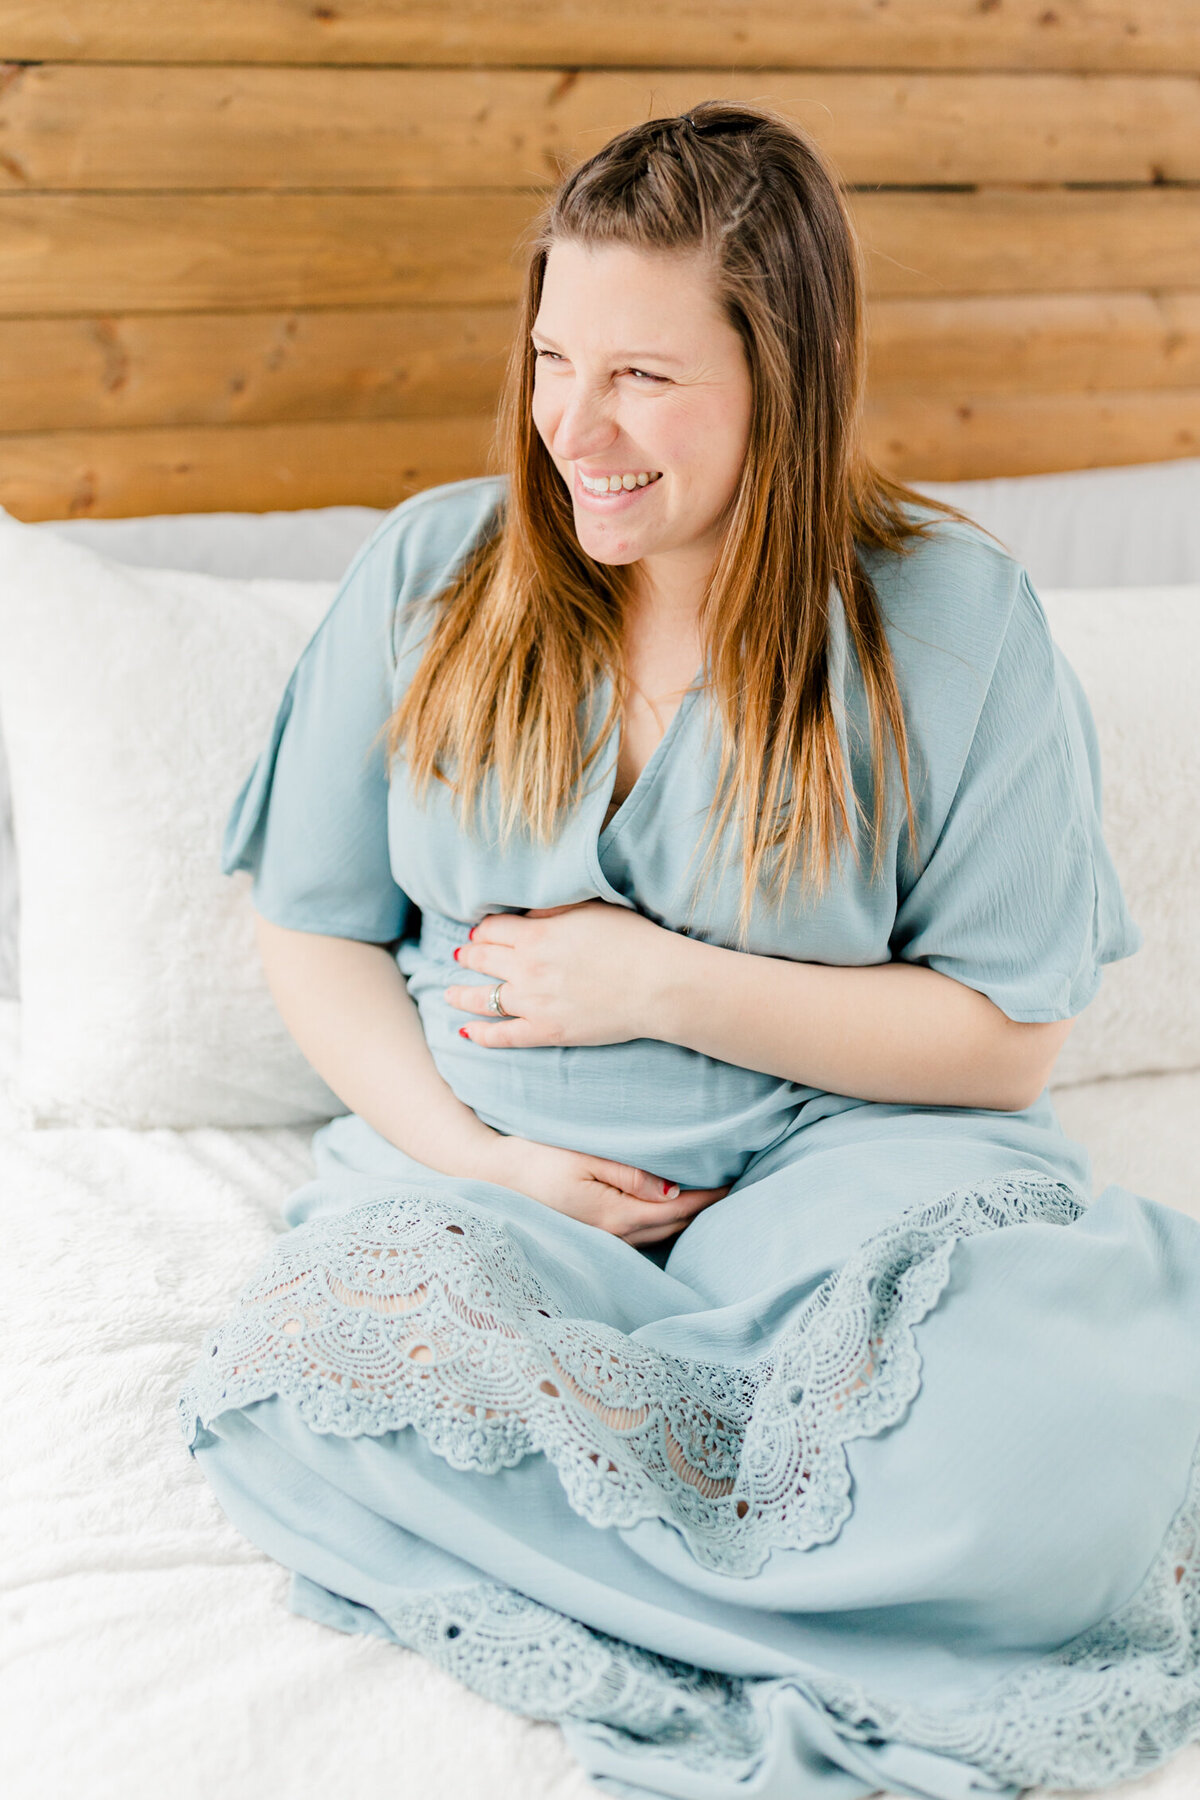 Pregnant woman laughing on bed